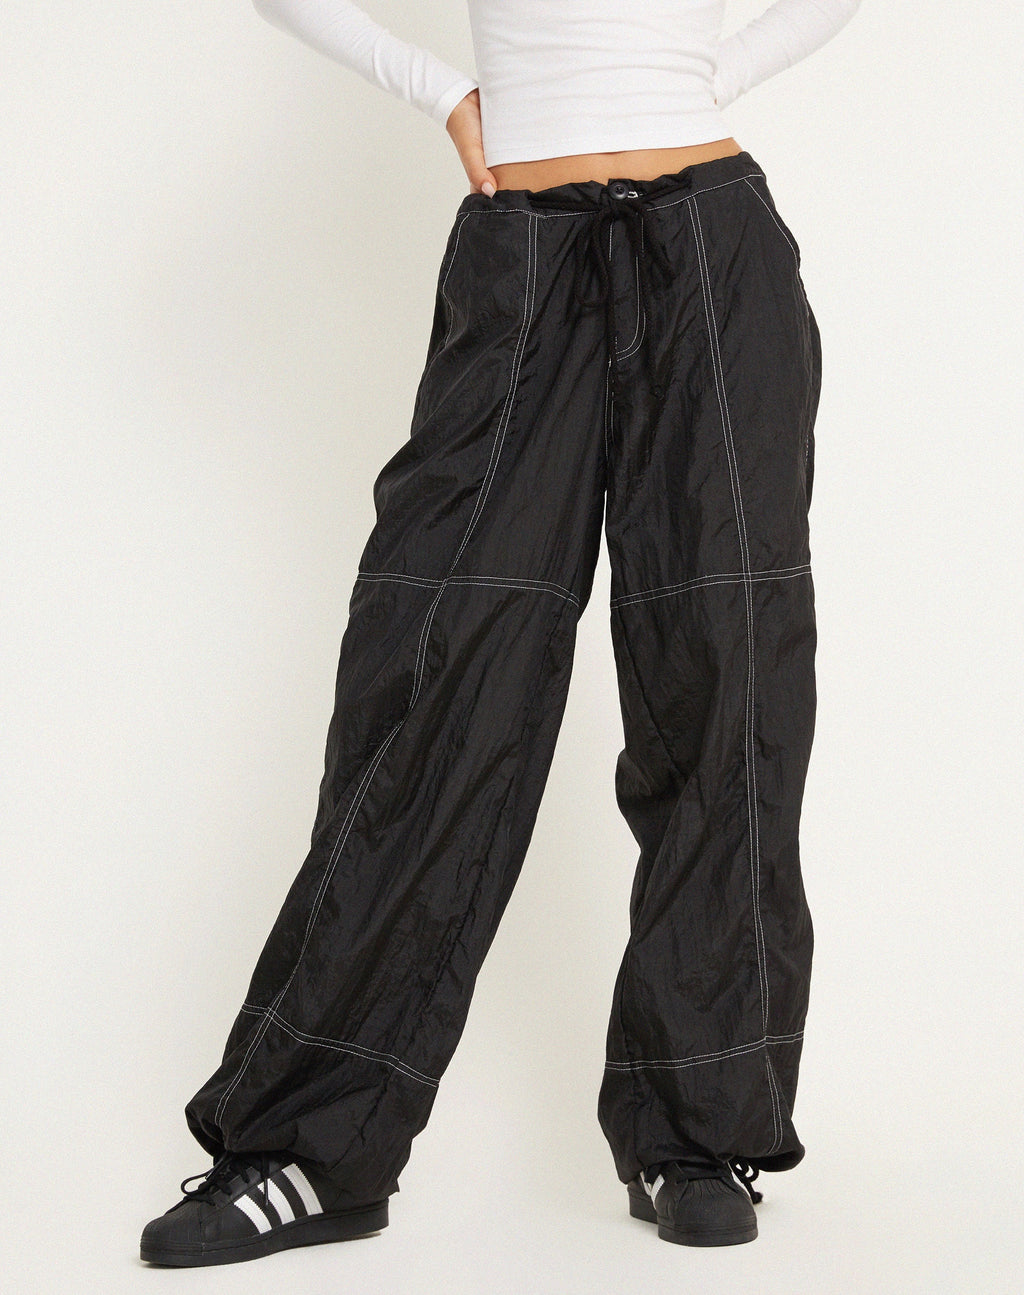 Phil Low Waist Trouser in Black with White Top Stitch